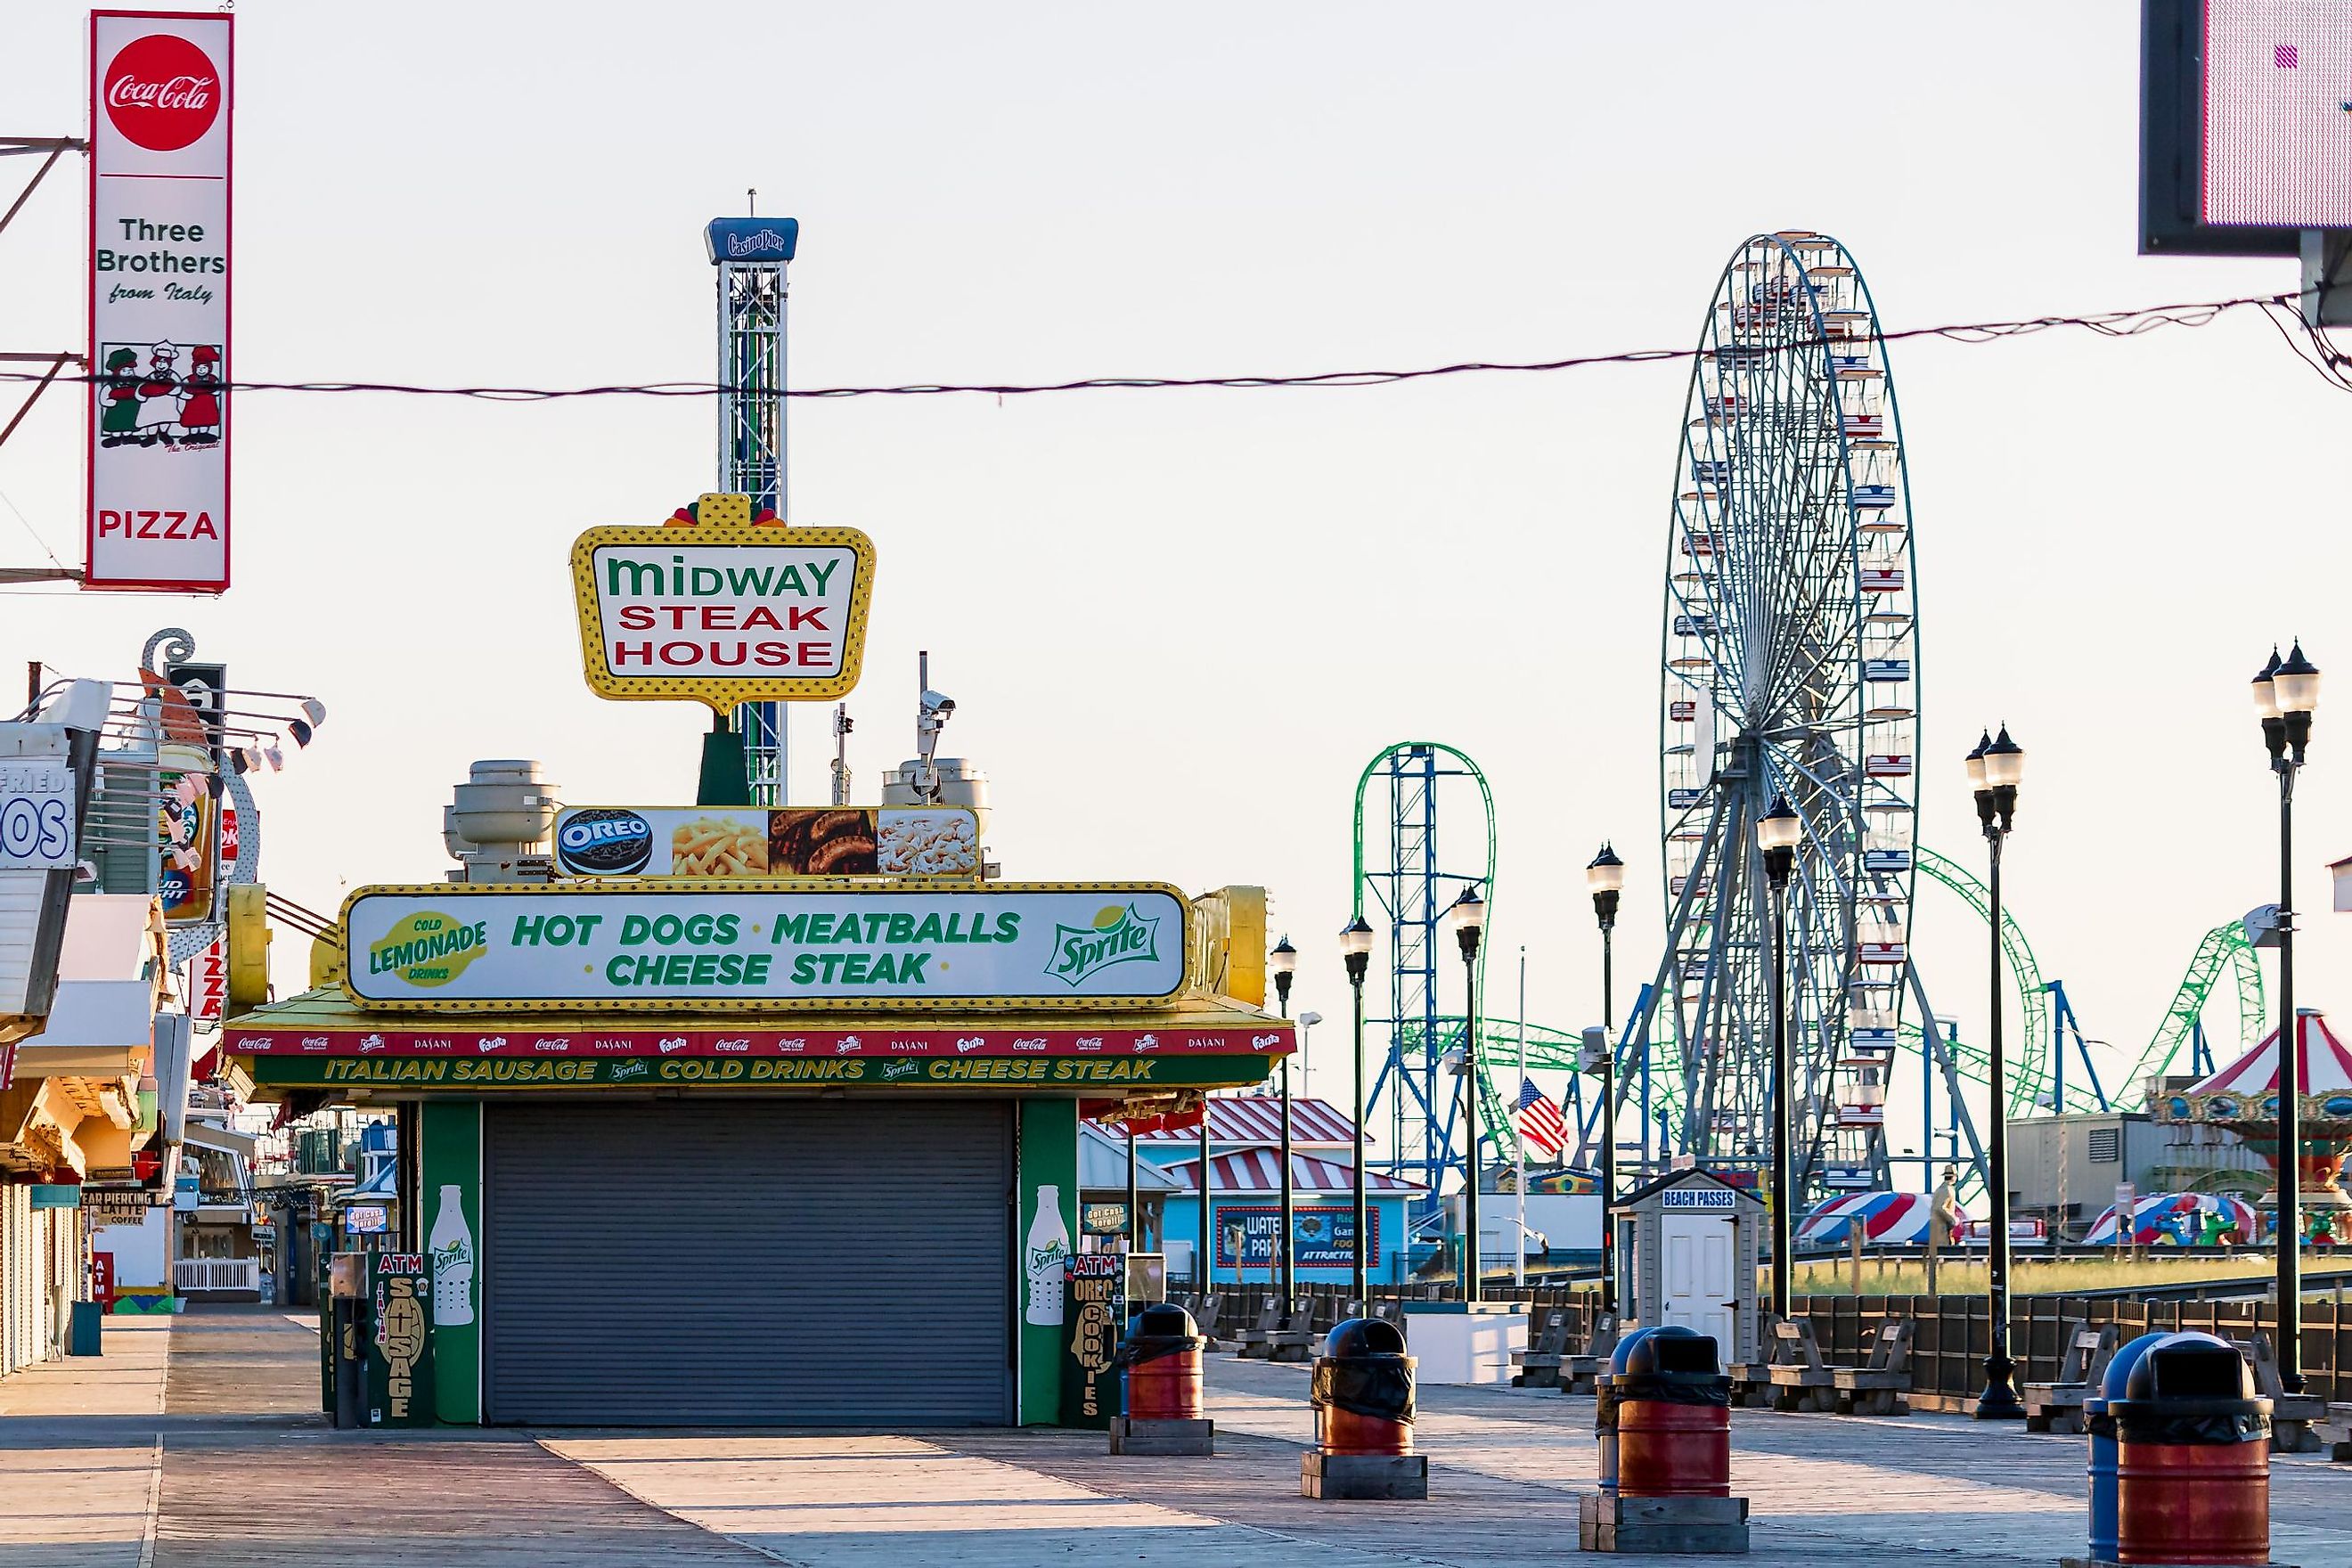 Seaside Heights boardwalk include the amusement park and store.